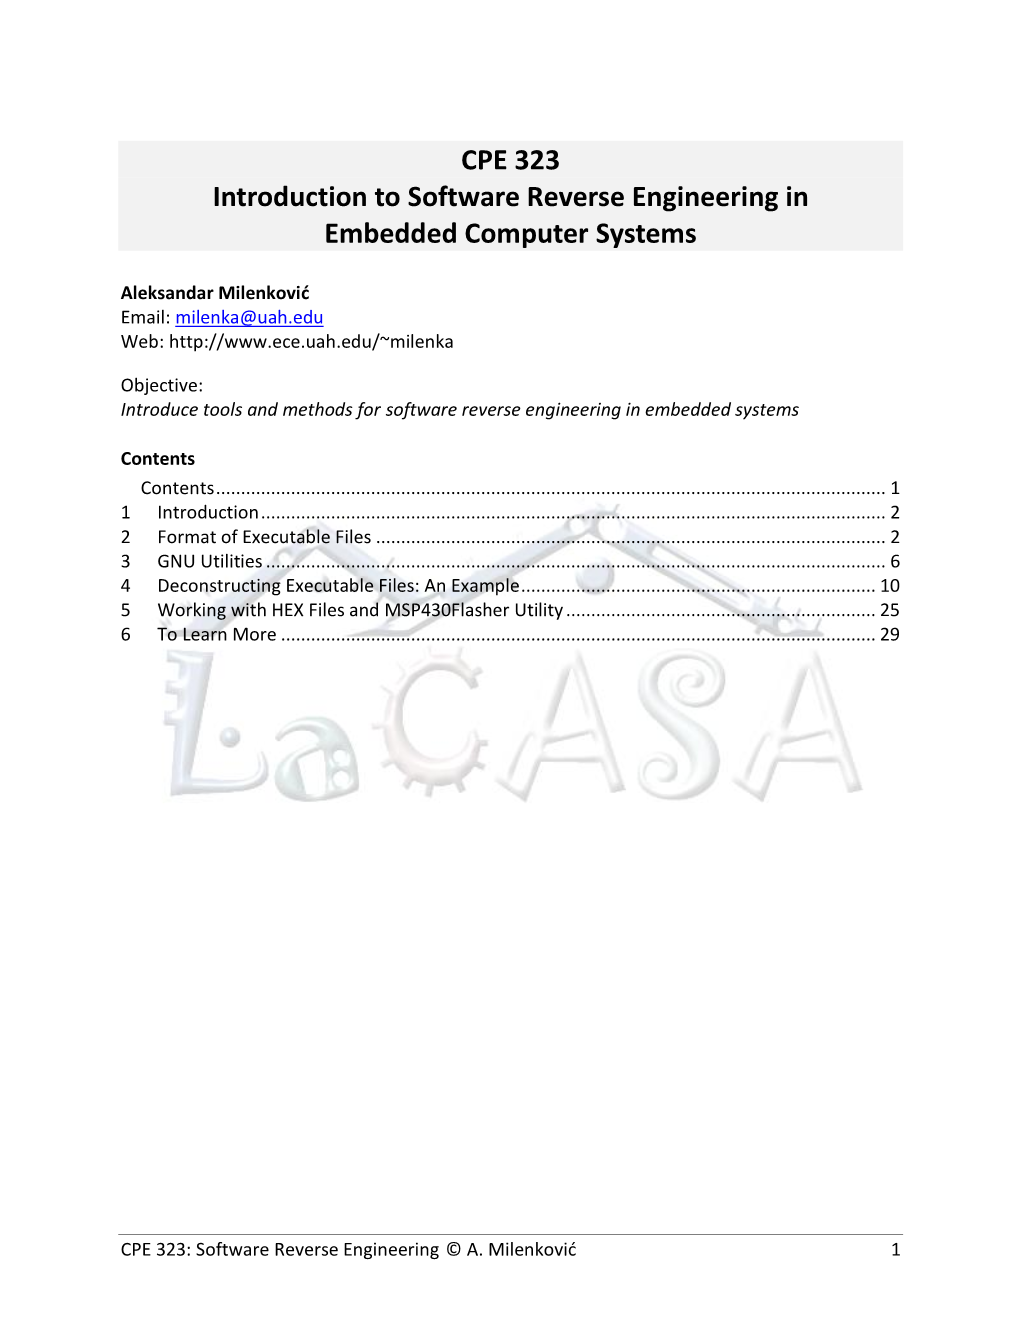 CPE 323 Introduction to Software Reverse Engineering in Embedded Computer Systems